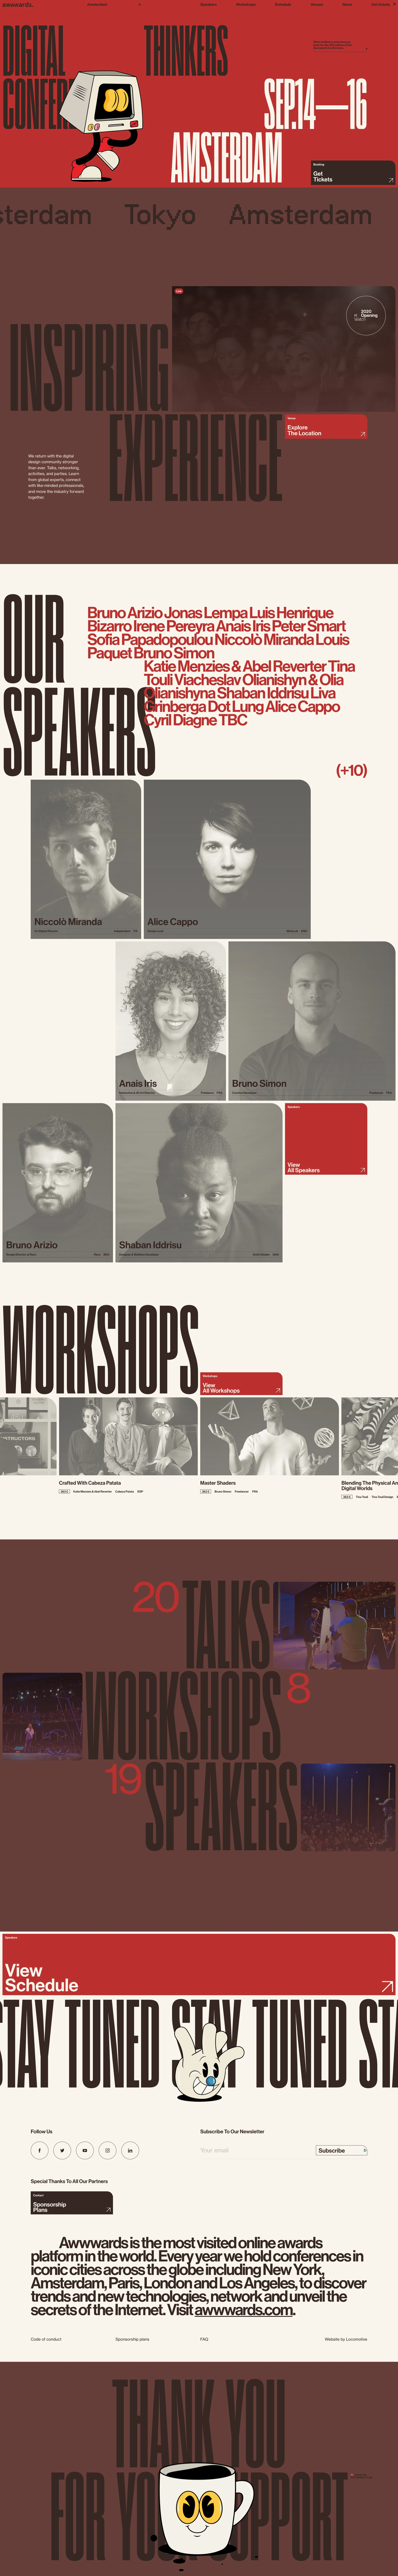 Awwwards Conference Landing Page Example: Three exciting days with some of the most influential speakers of the industry, who inspire, teach, and guide us as we face the many challenges and opportunities which lie ahead in the future of the web.